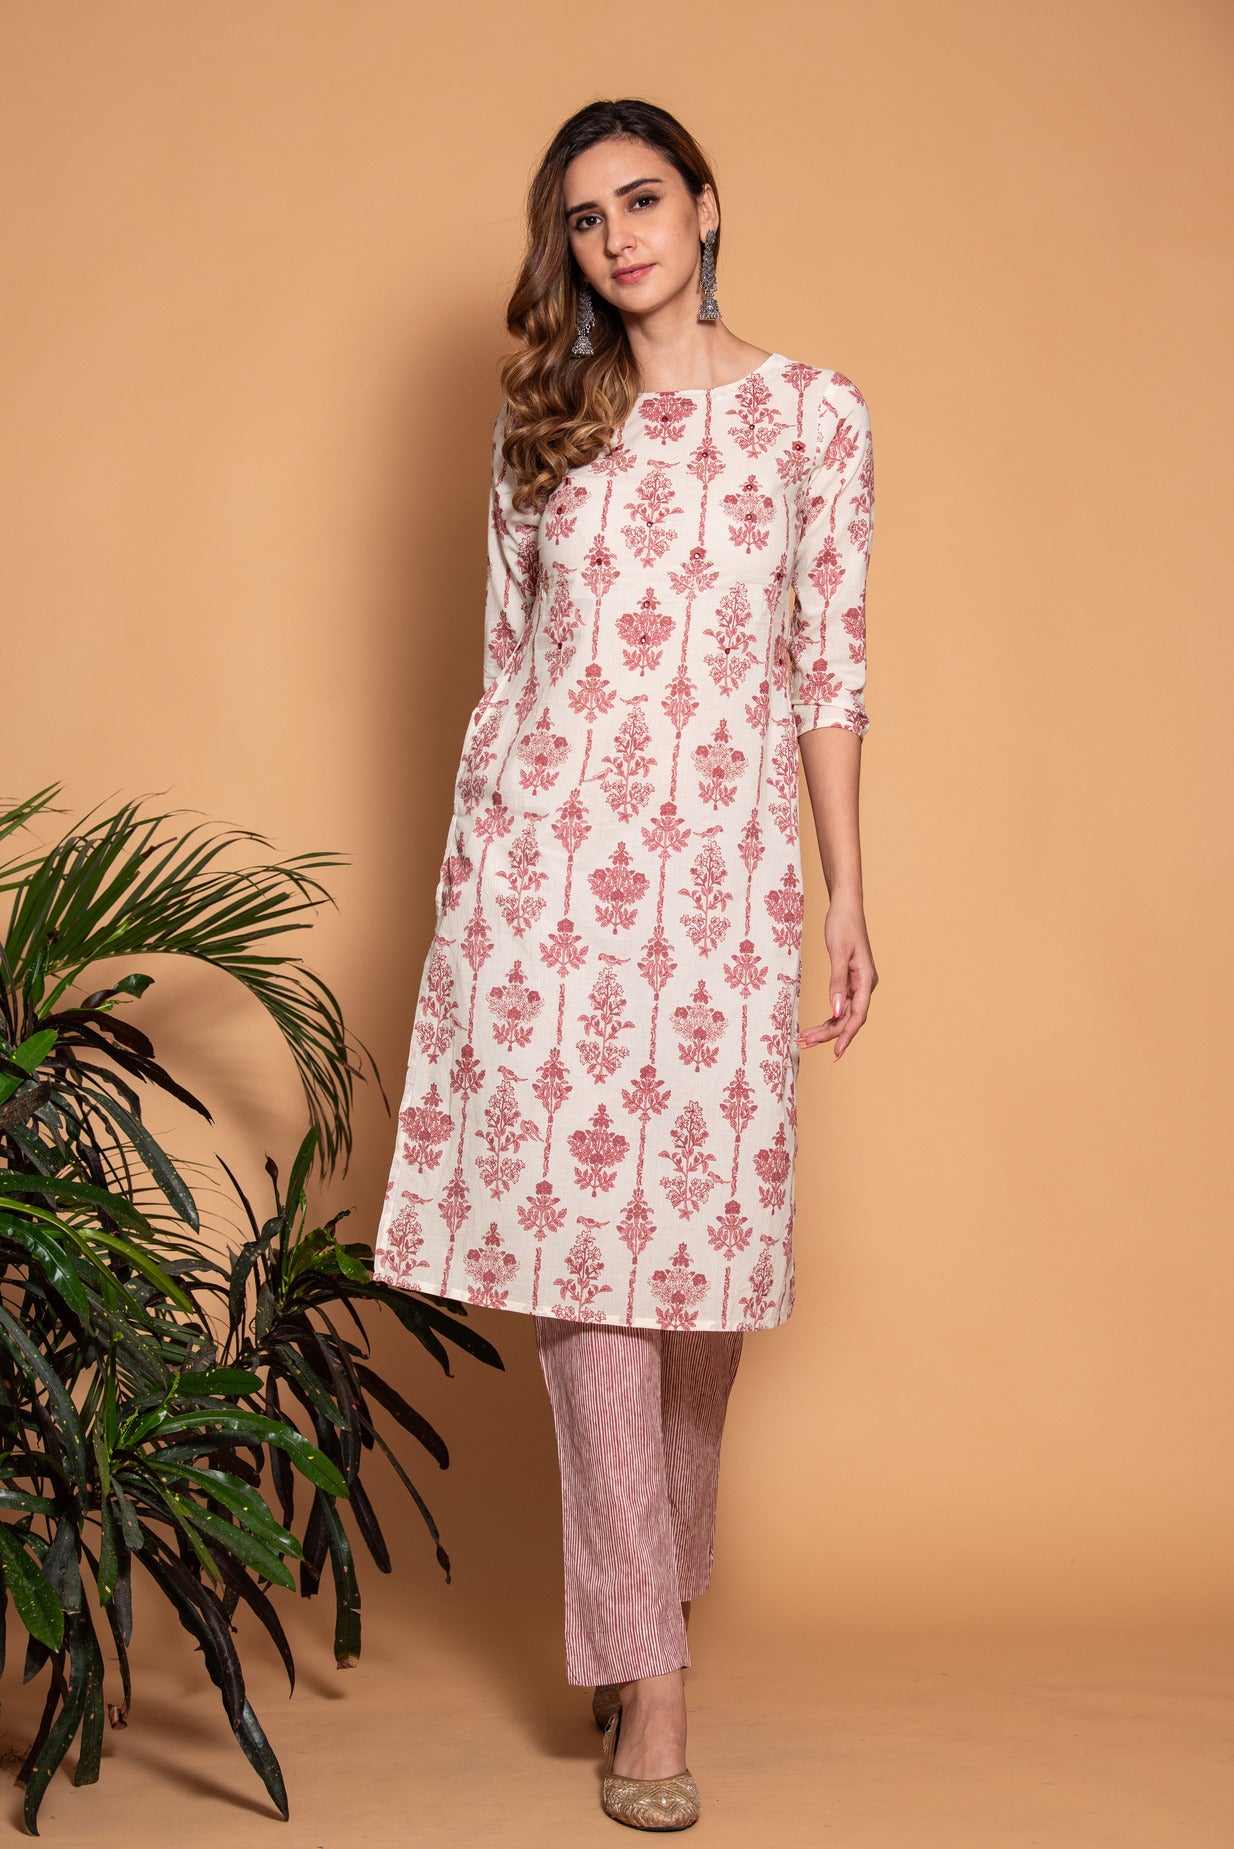 Off-White with Maroon Floral Printed Cotton Kurta Set